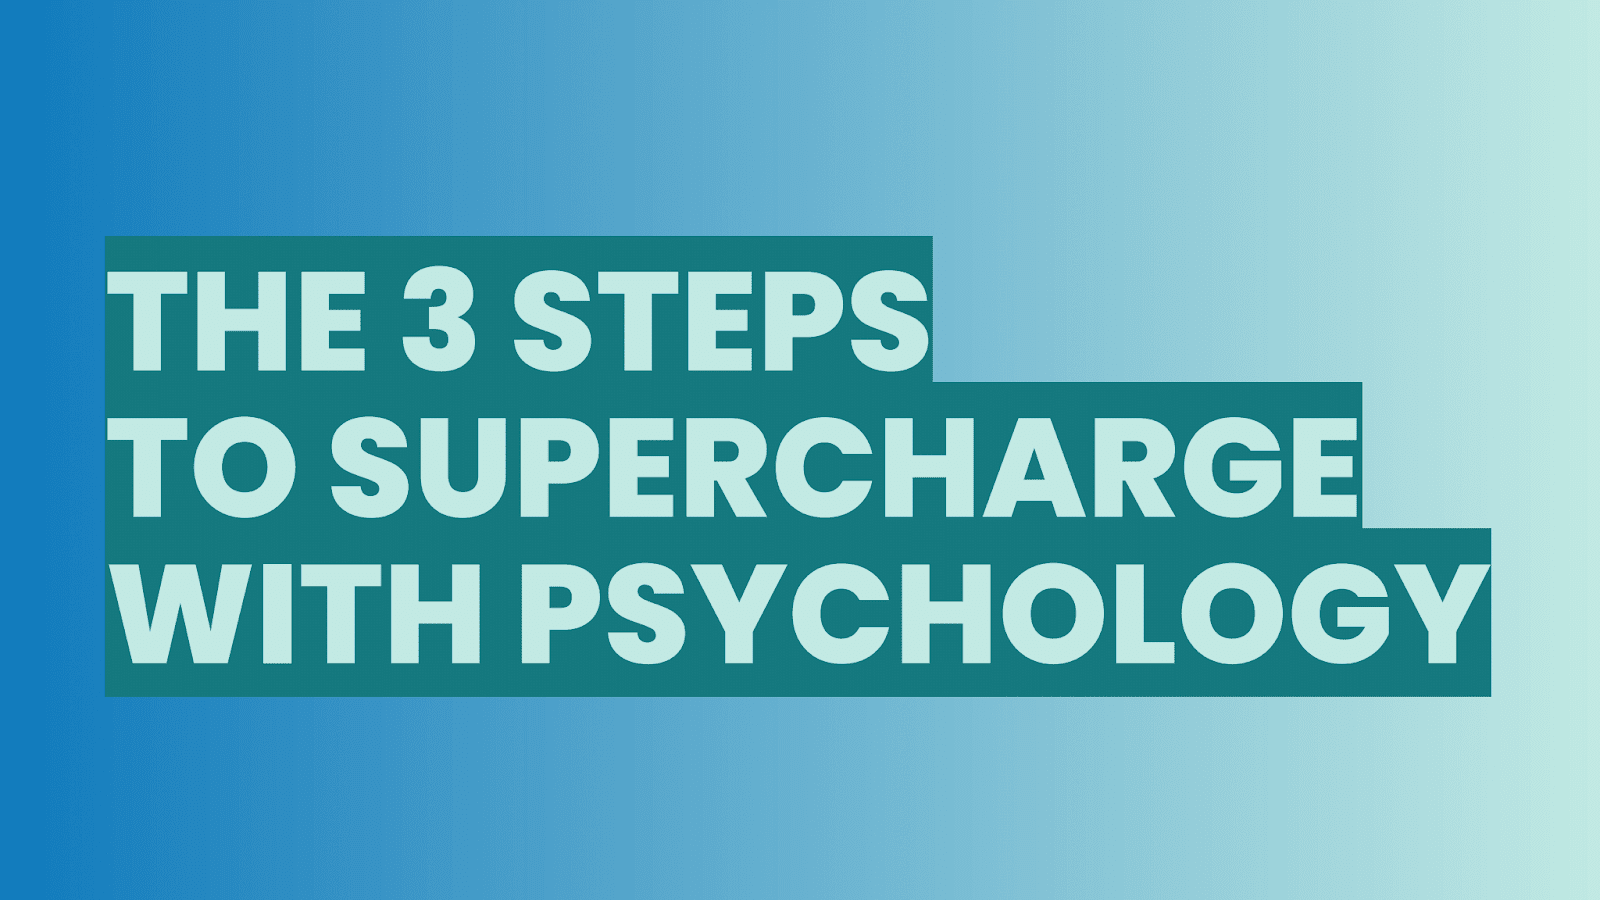 The 3 steps to supercharge with psychology